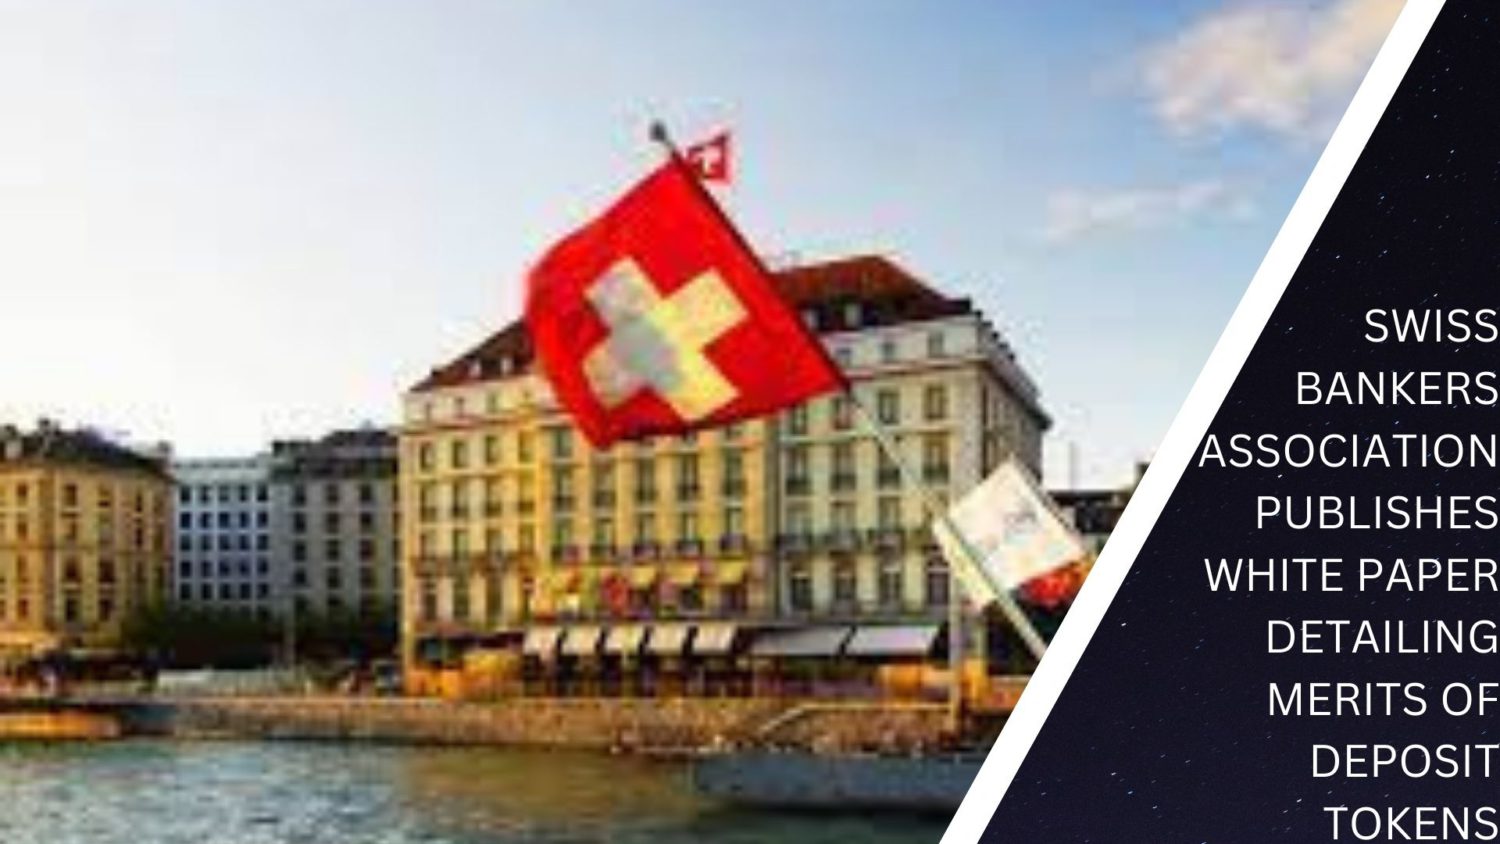 Swiss Bankers Association Publishes White Paper Detailing Merits Of Deposit Tokens